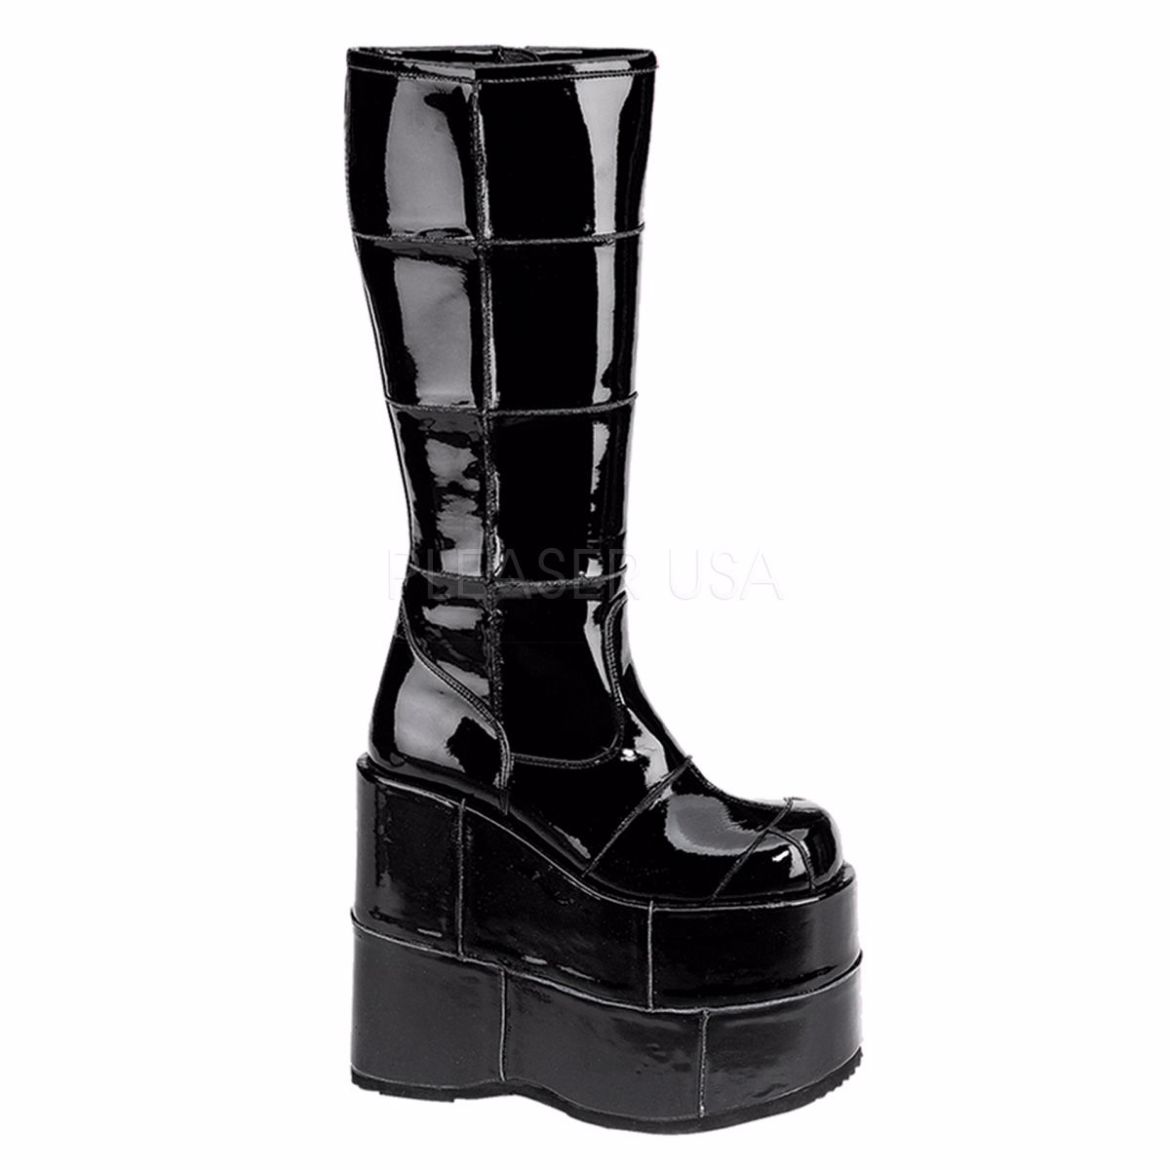 Product image of Demonia Stack-301 Black Patent, 7 inch Platform Knee High Boot